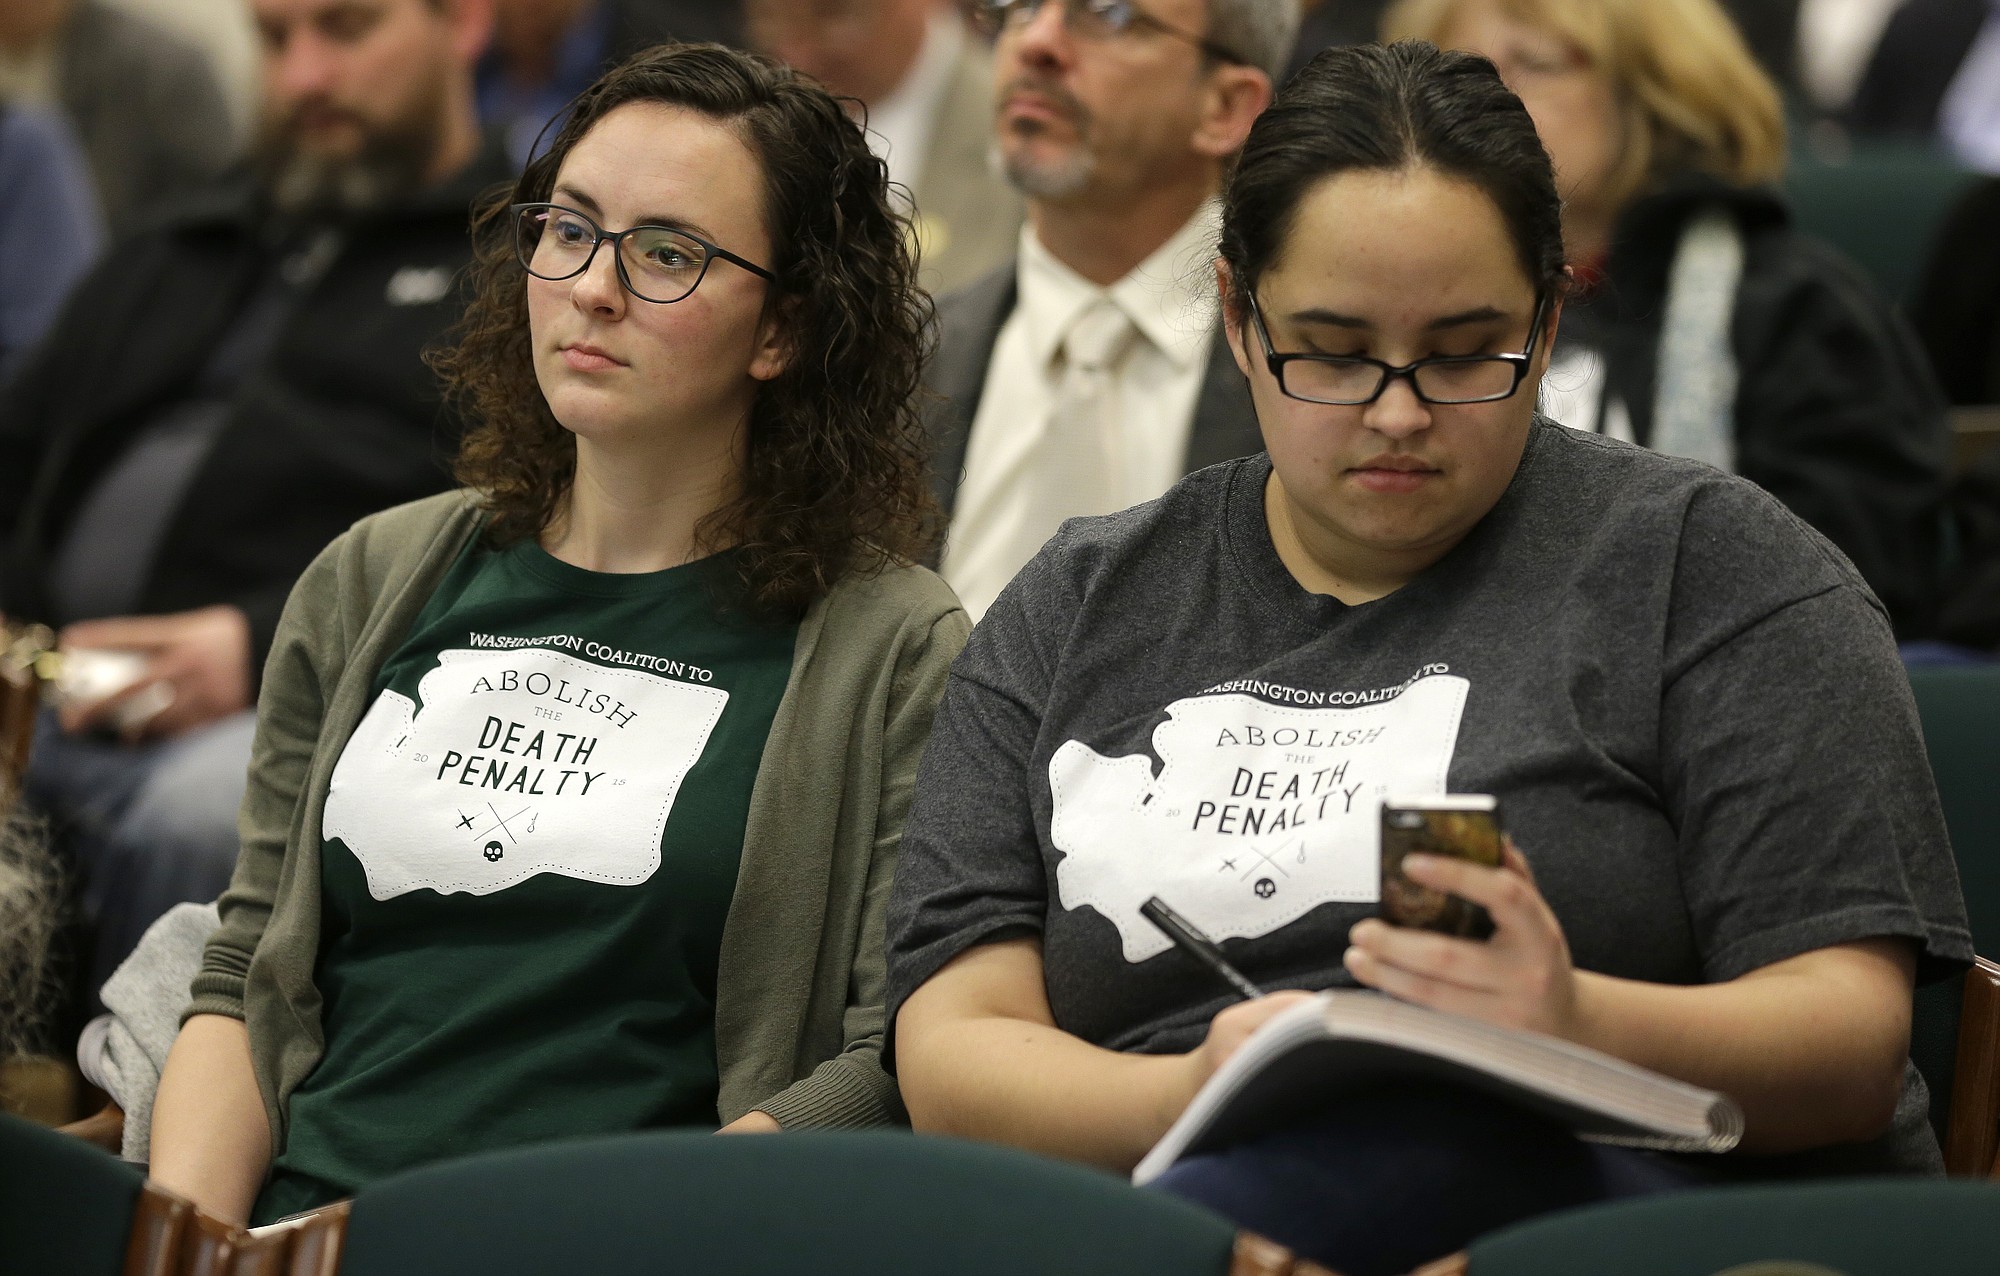 Danielle Fulfs, left, and Xochitl Maykovich , right, both with the Washington Coalition to Abolish the Death Penalty, listen and take notes during a hearing session of House Judiciary Committee, Wednesday, Feb.